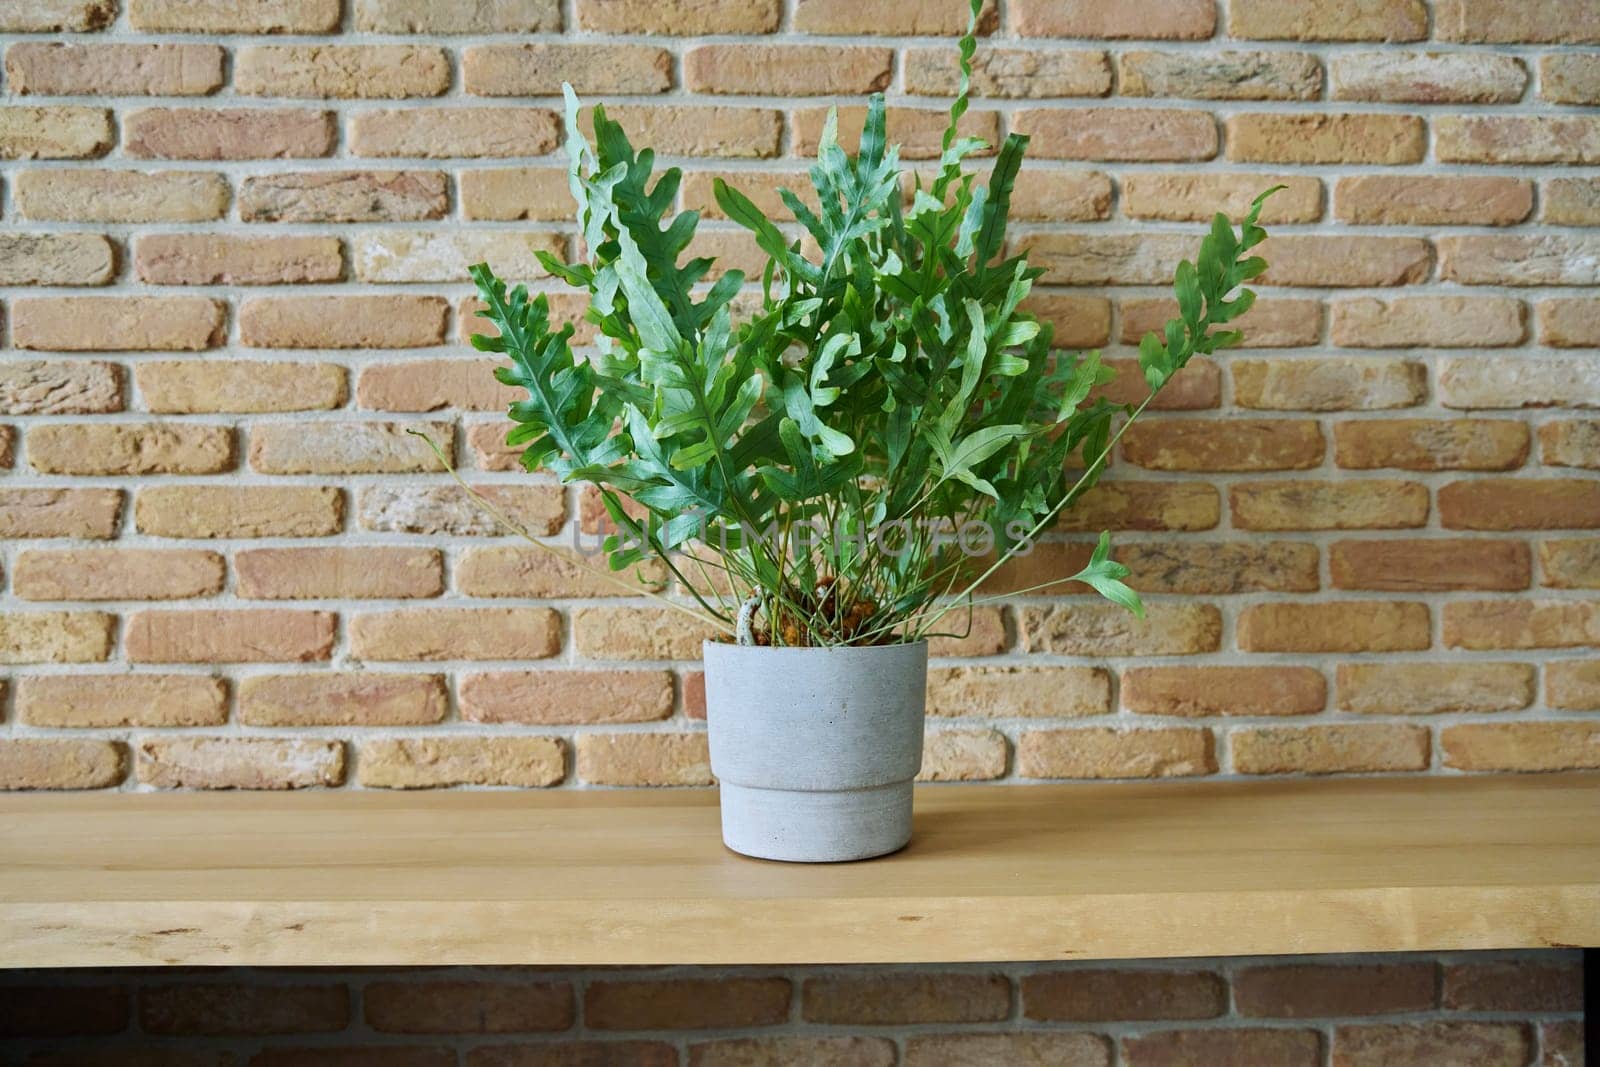 Single plant in pot, Phlebodium aureum, Blue Star fern on wooden counter, brick wall background. Background, copy space, design style interior, decor, house, plants concept